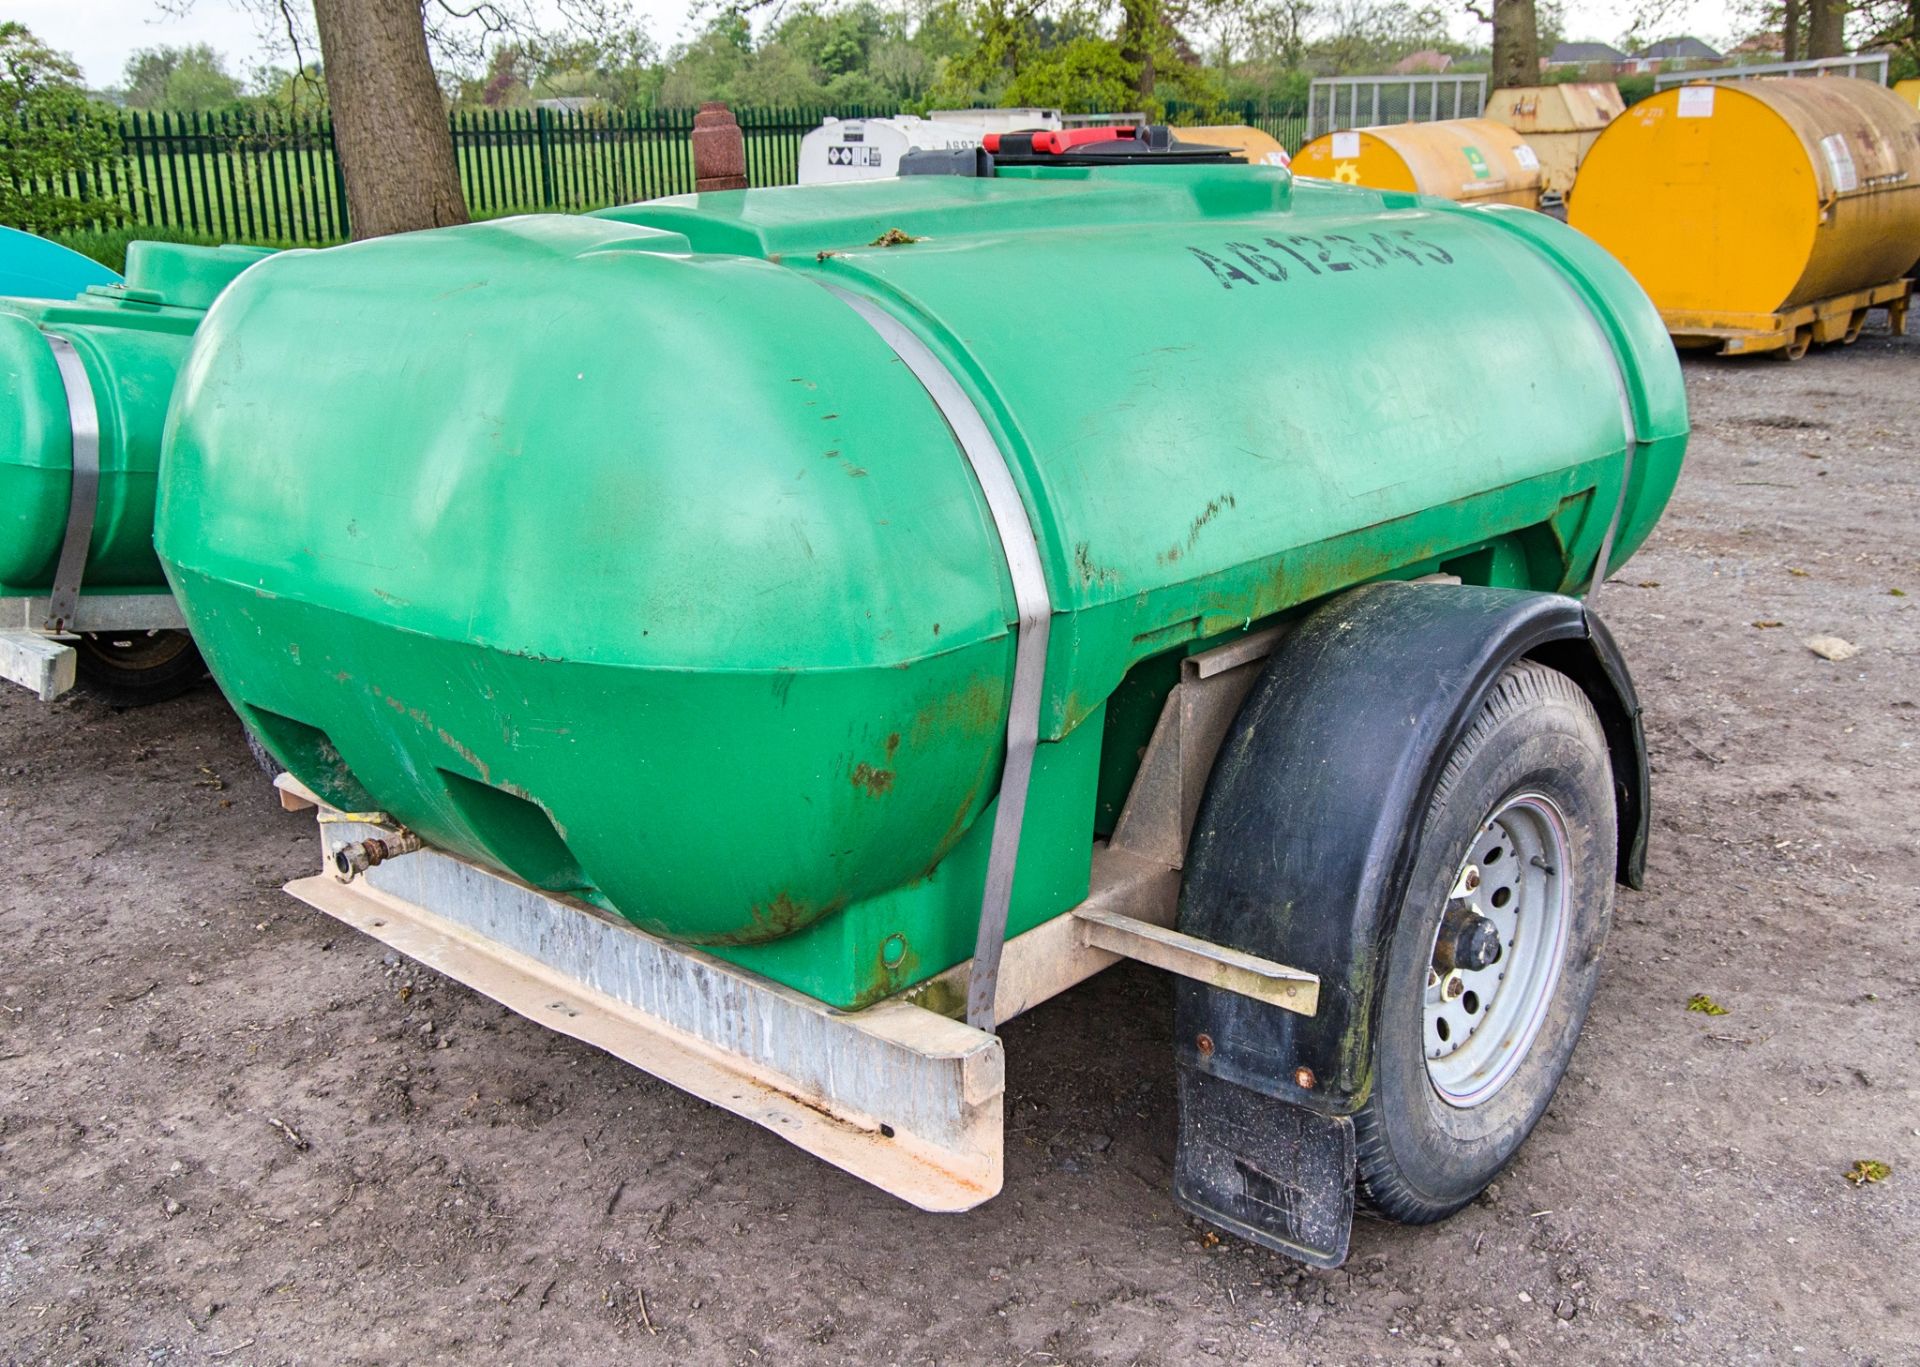 Trailer Engineering 2000 litre fast tow mobile water bowser A612645 - Bild 3 aus 6